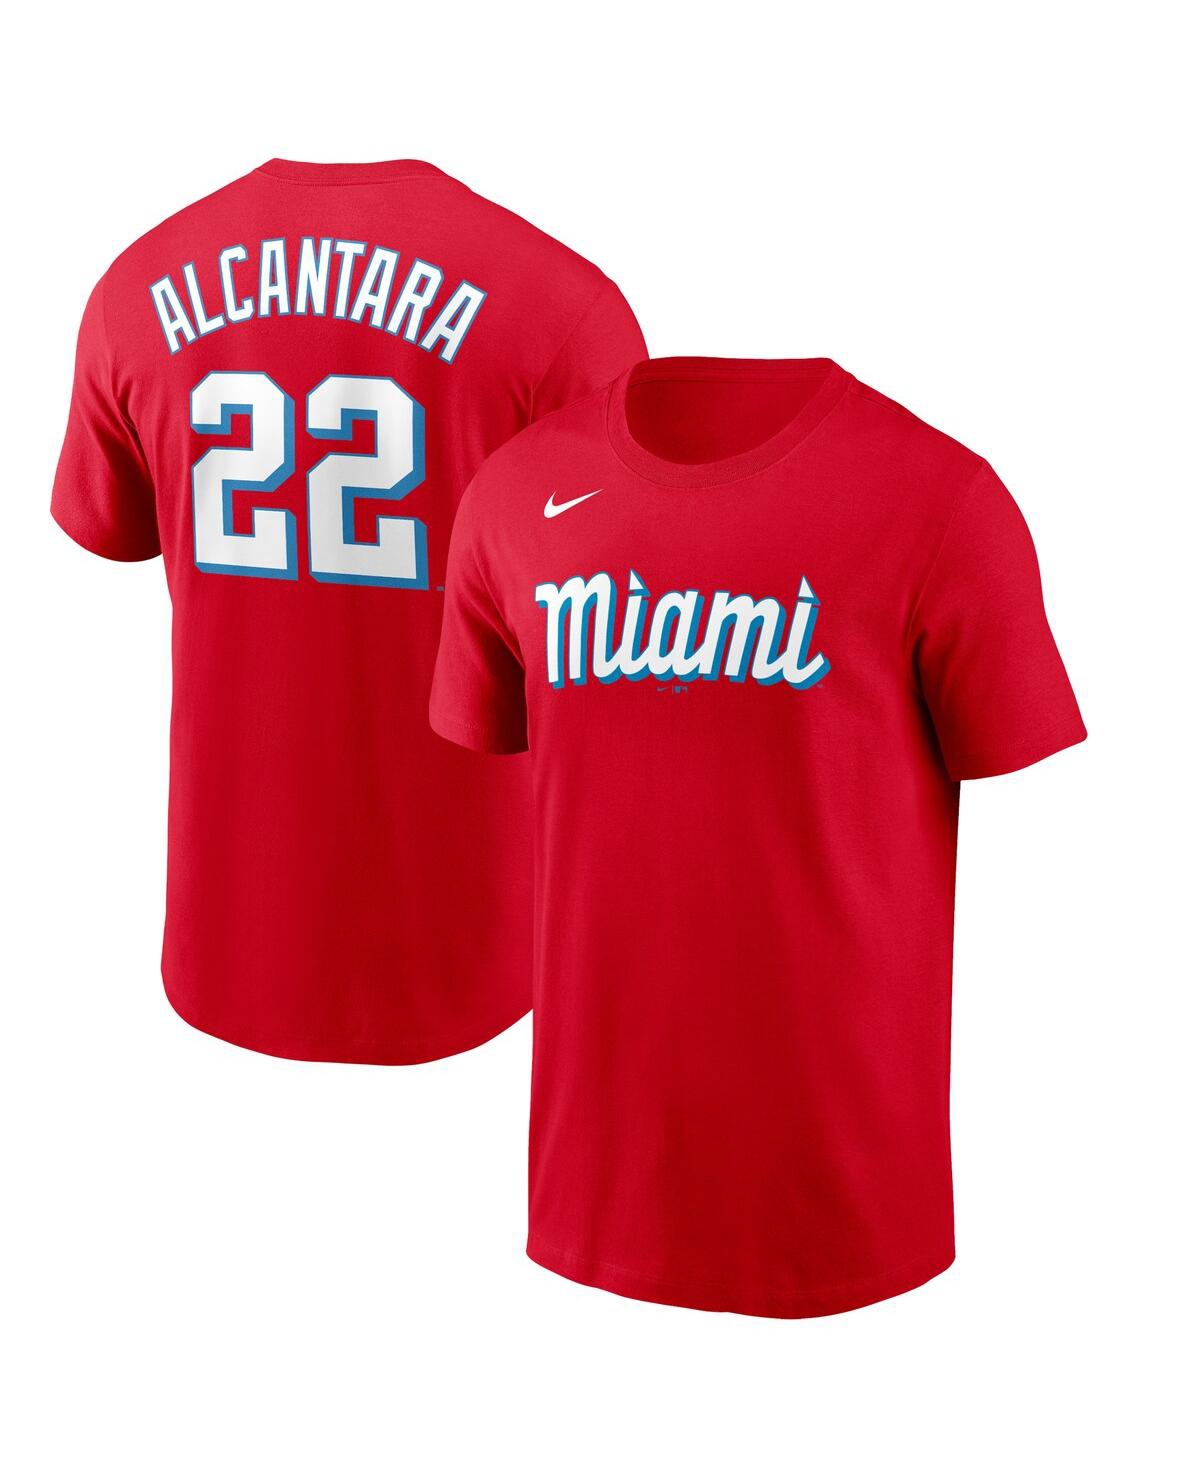 NIKE MEN'S NIKE SANDY ALCANTARA RED MIAMI MARLINS CITY CONNECT NAME AND NUMBER T-SHIRT